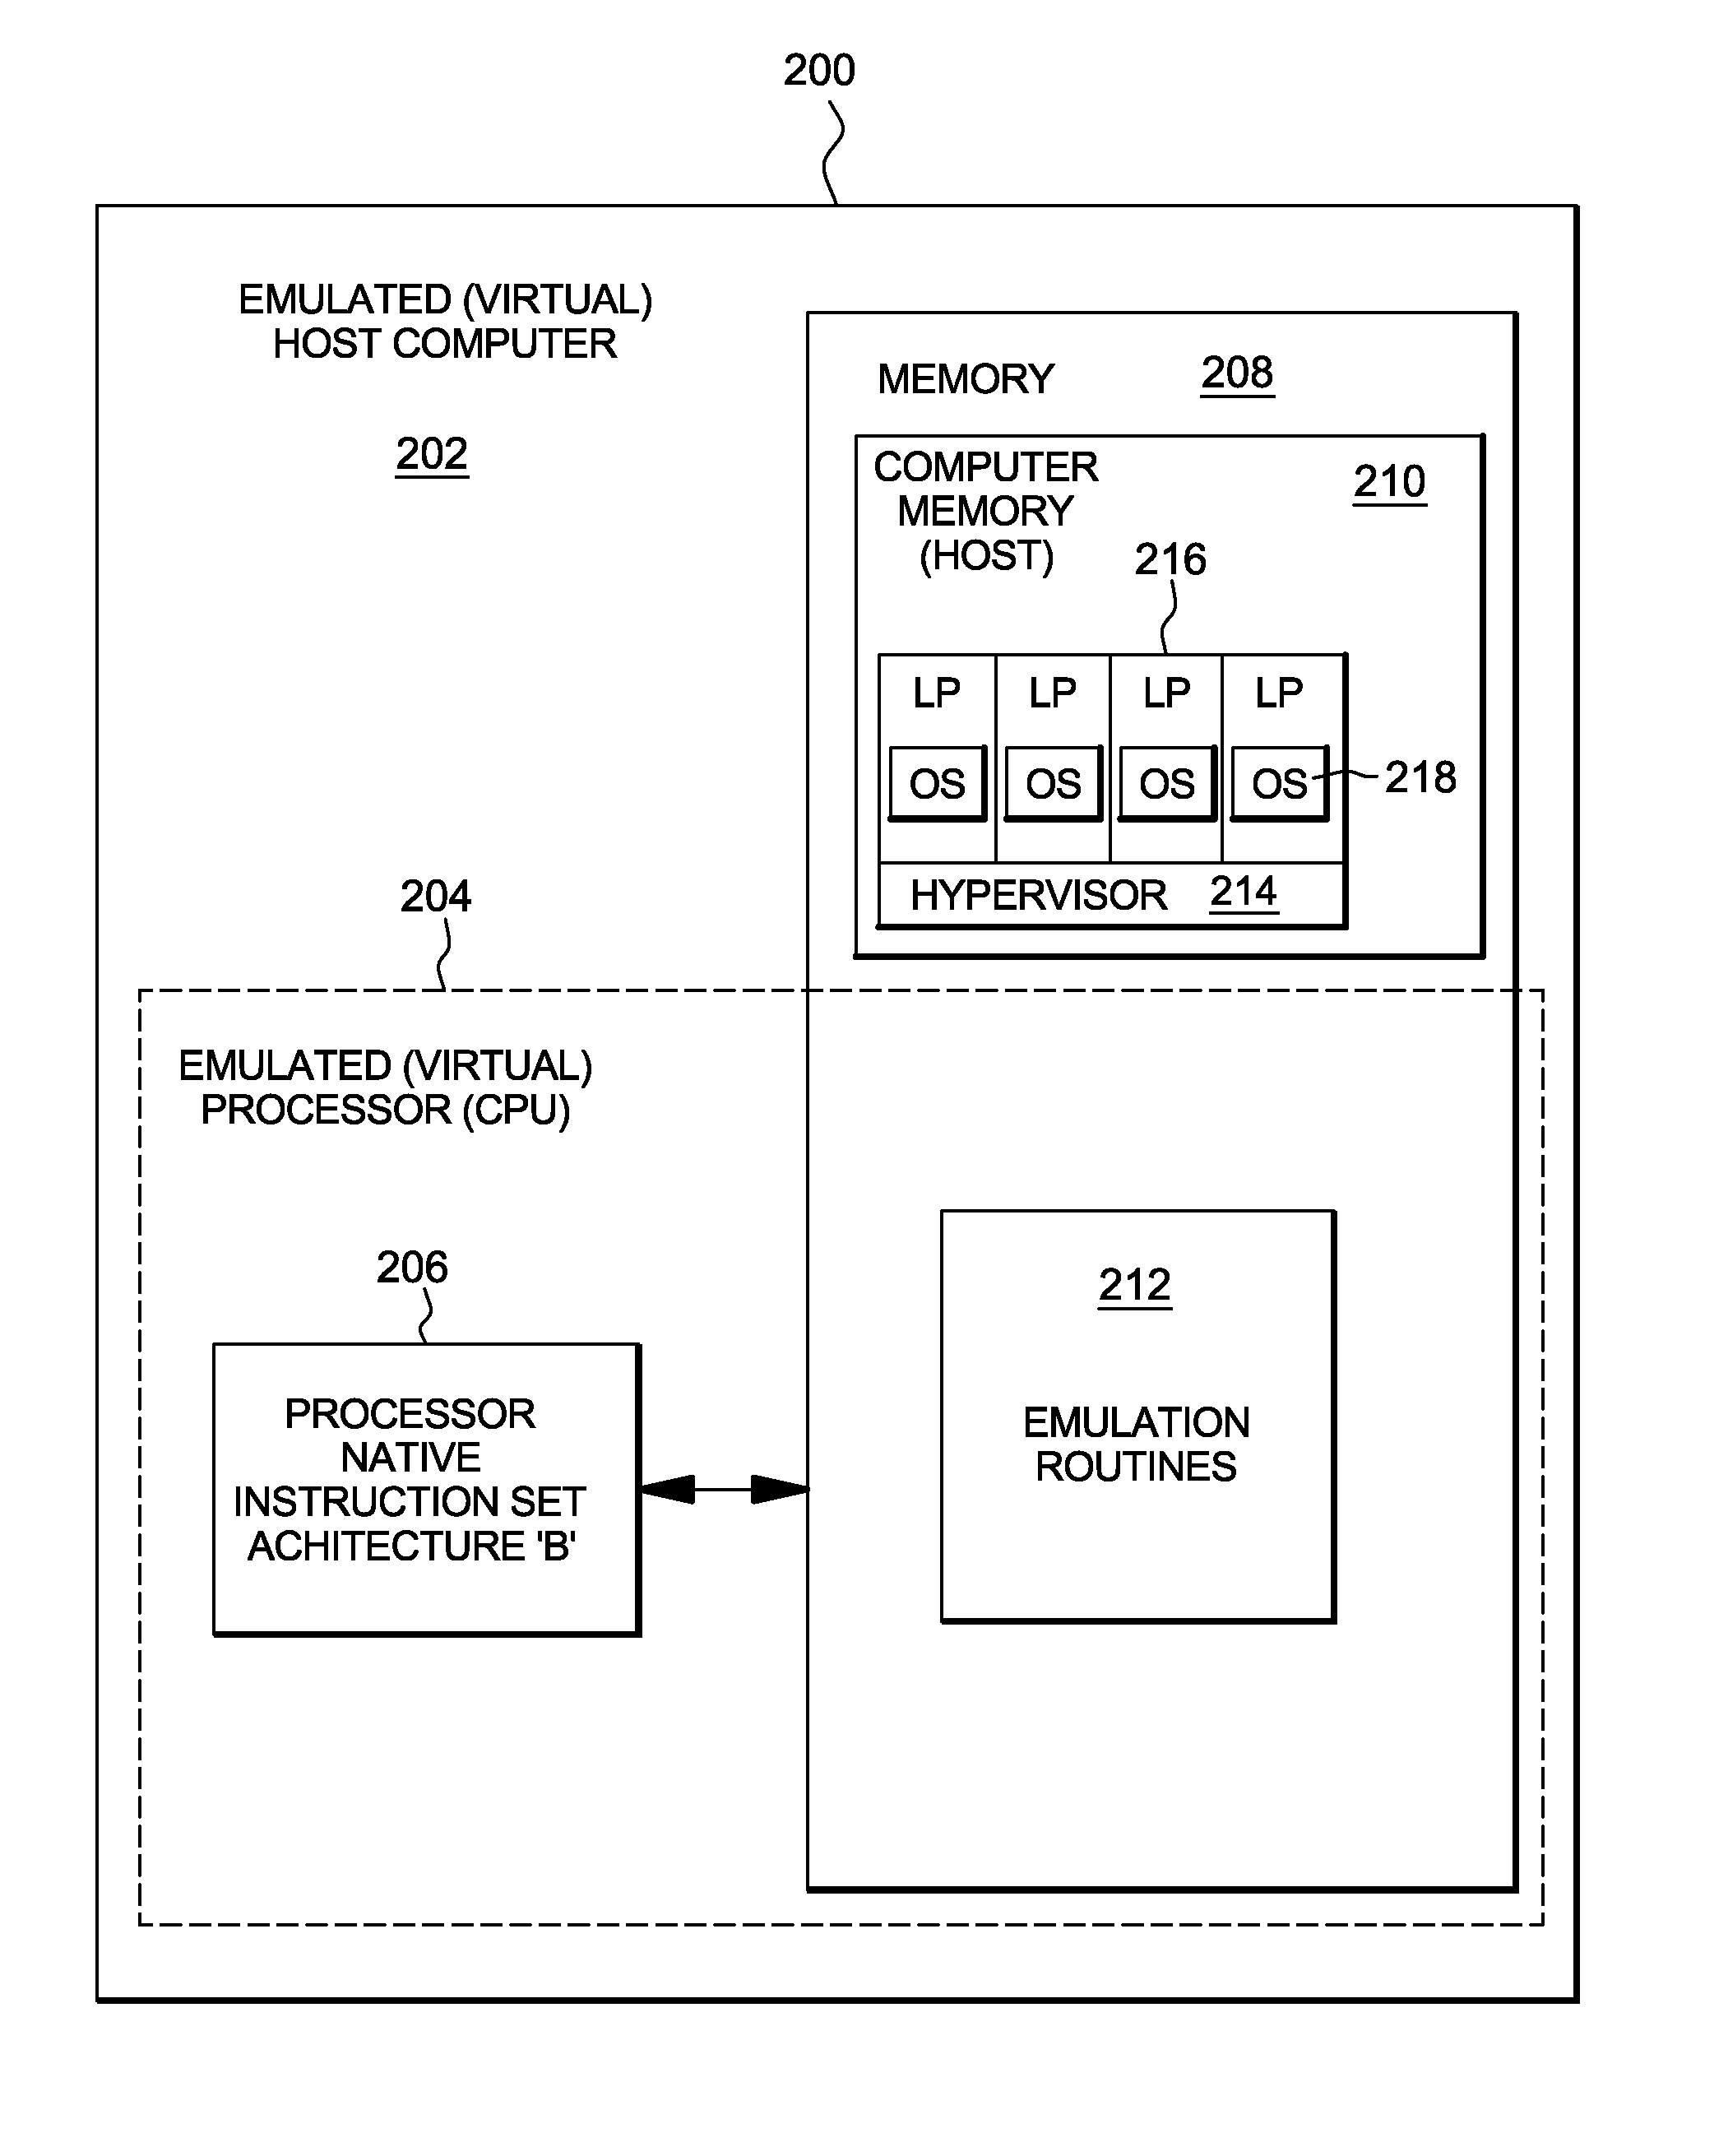 Facilitating quiesce operations within a logically partitioned computer system